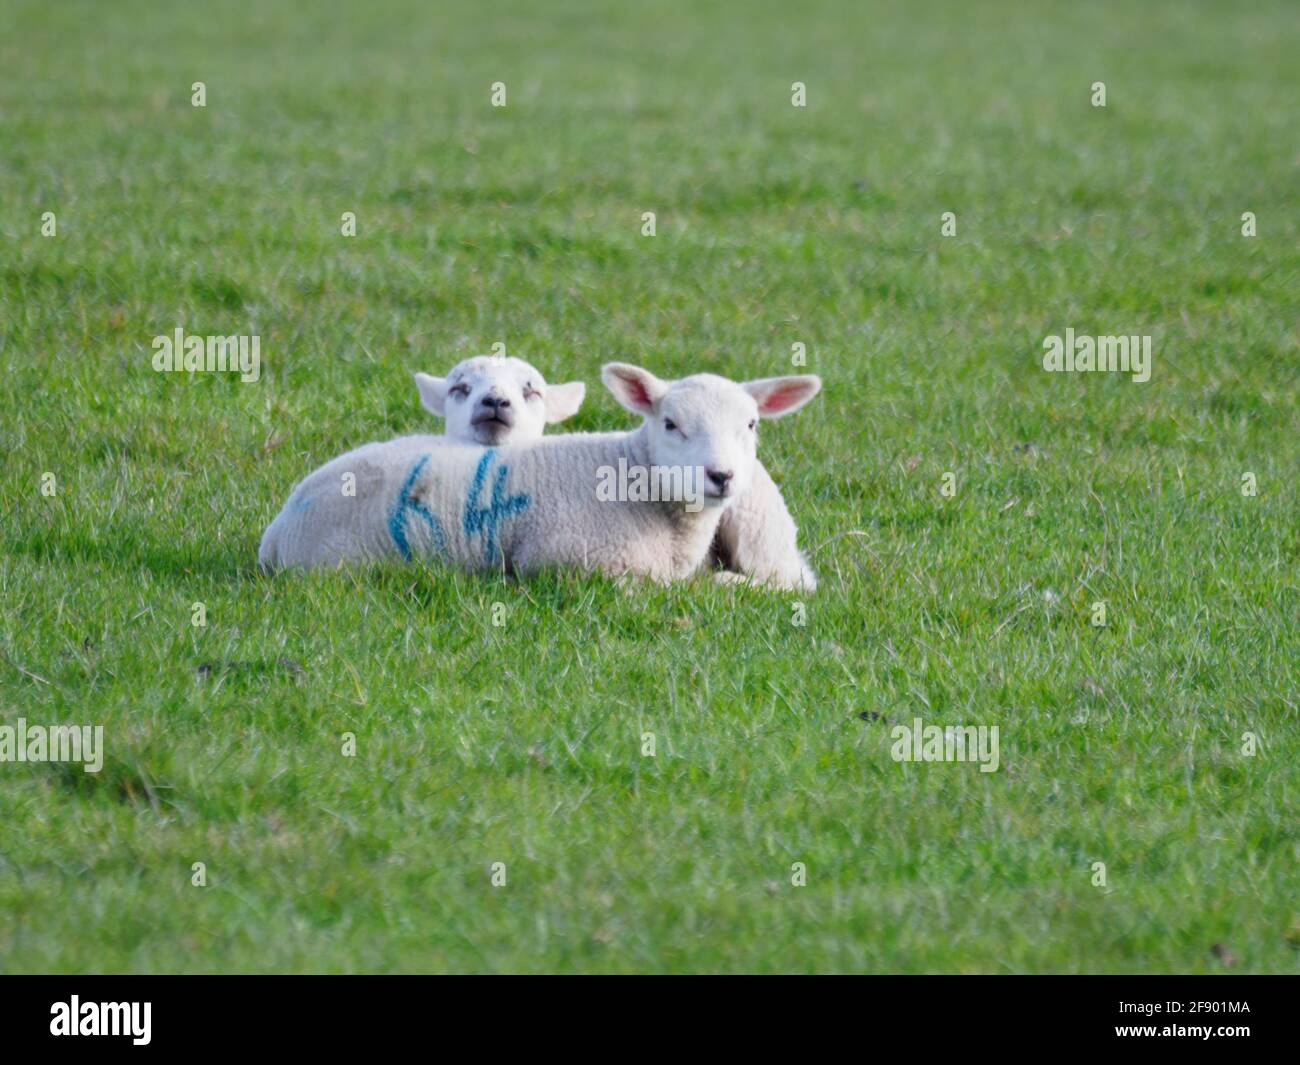 A Pair of lambs (Ovis aries) resting in a field. Stock Photo